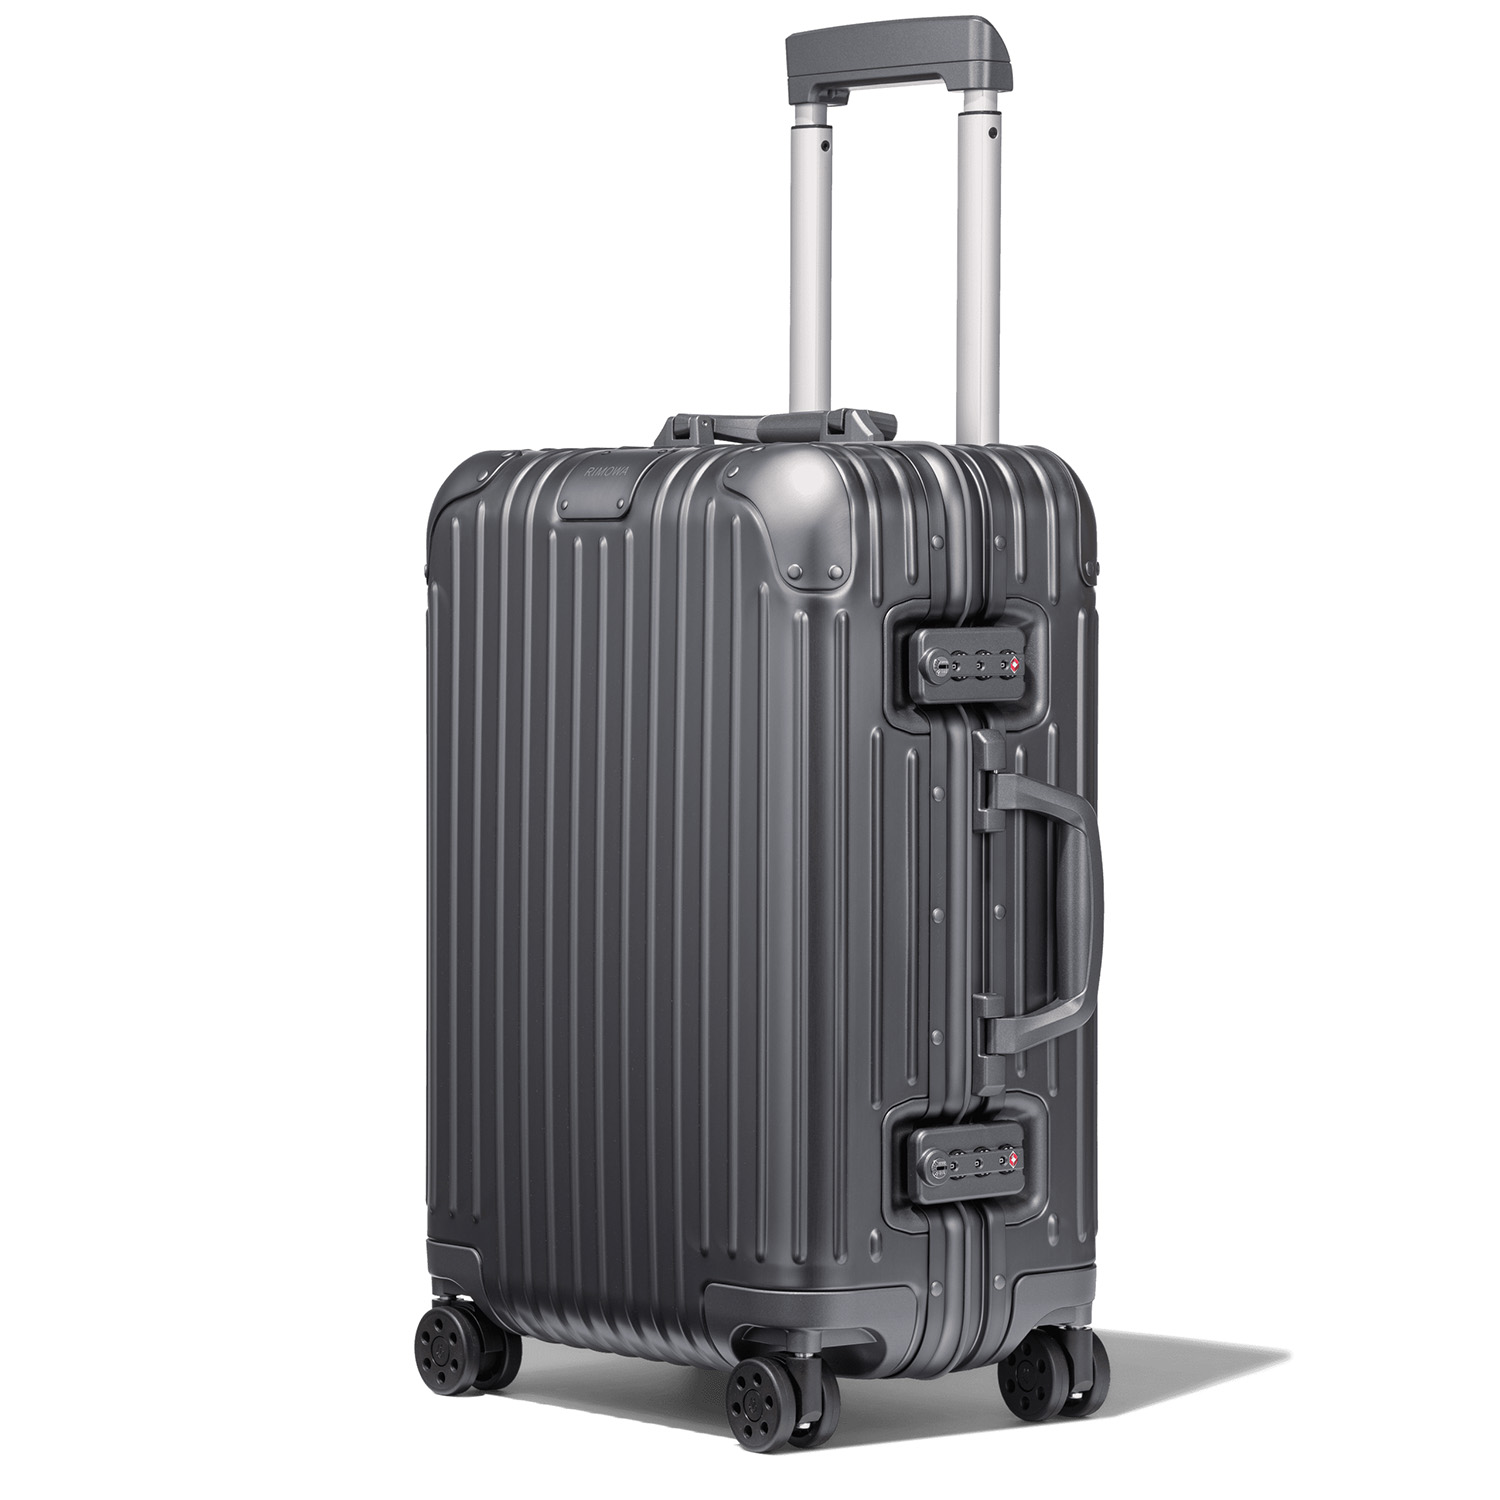 RIMOWA introduces two new limited edition aluminium luggage colours